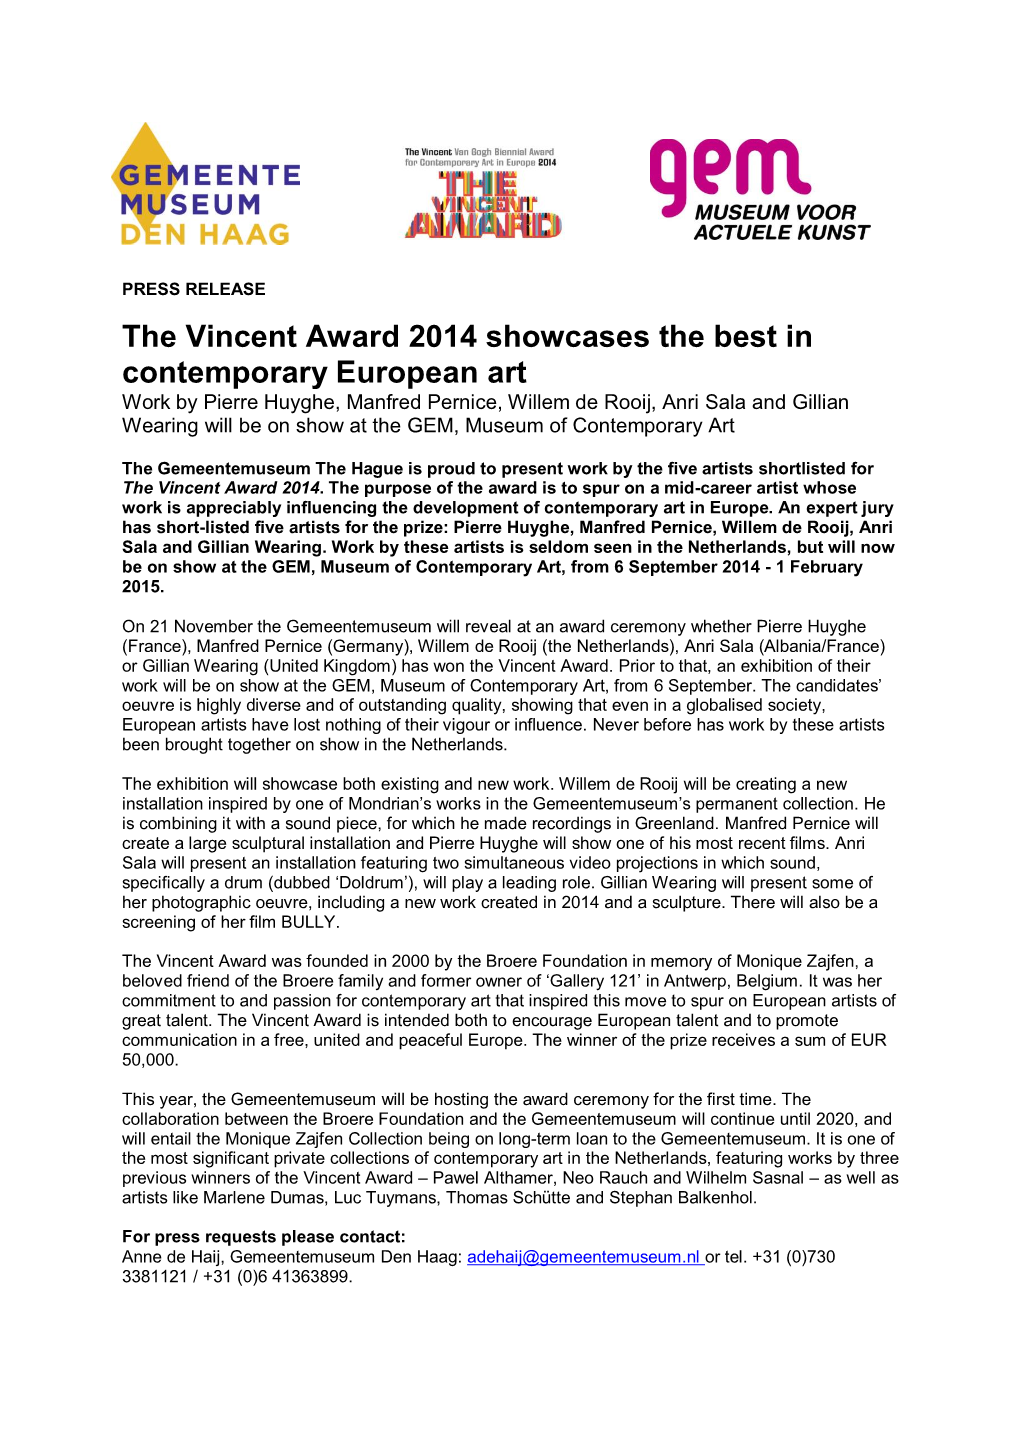 The Vincent Award 2014 Showcases the Best in Contemporary European